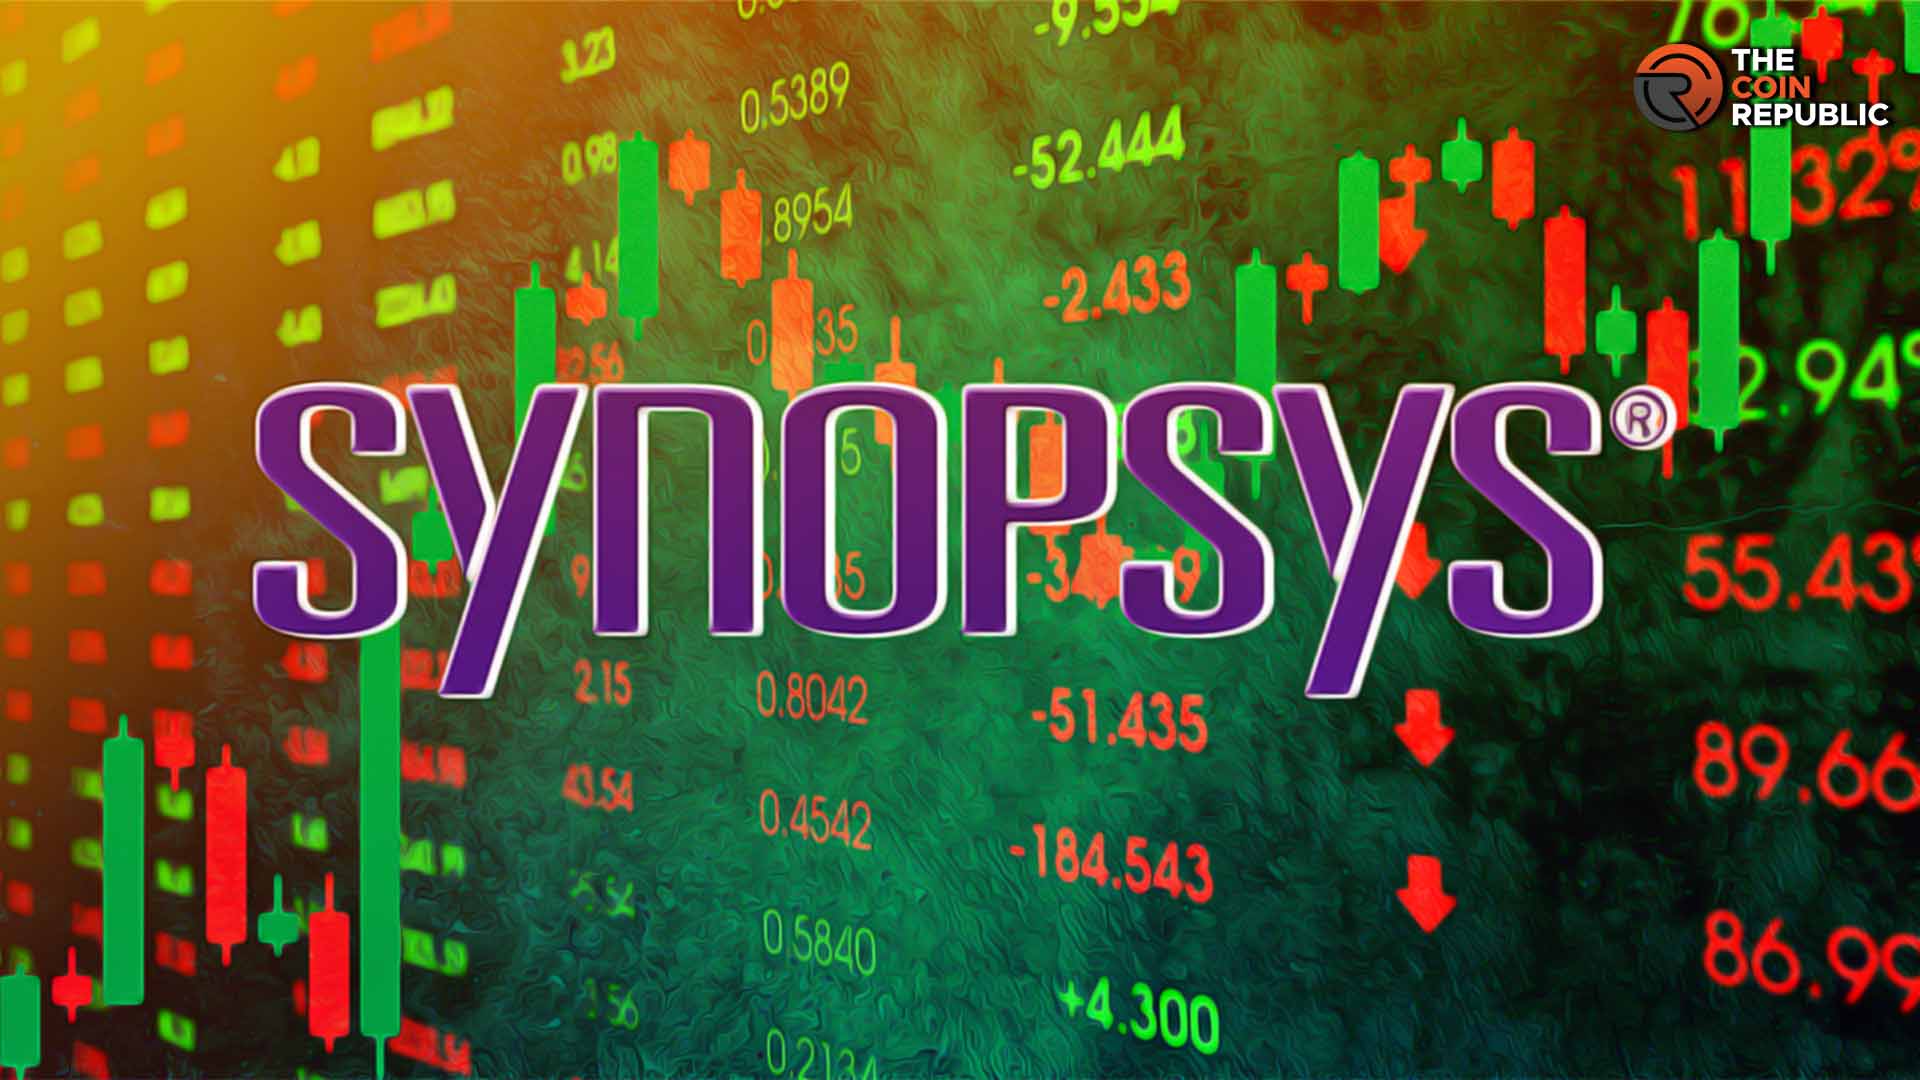 SNPS Stock Forecast: Is $500 Achievable For (NASDAQ: SNPS)?